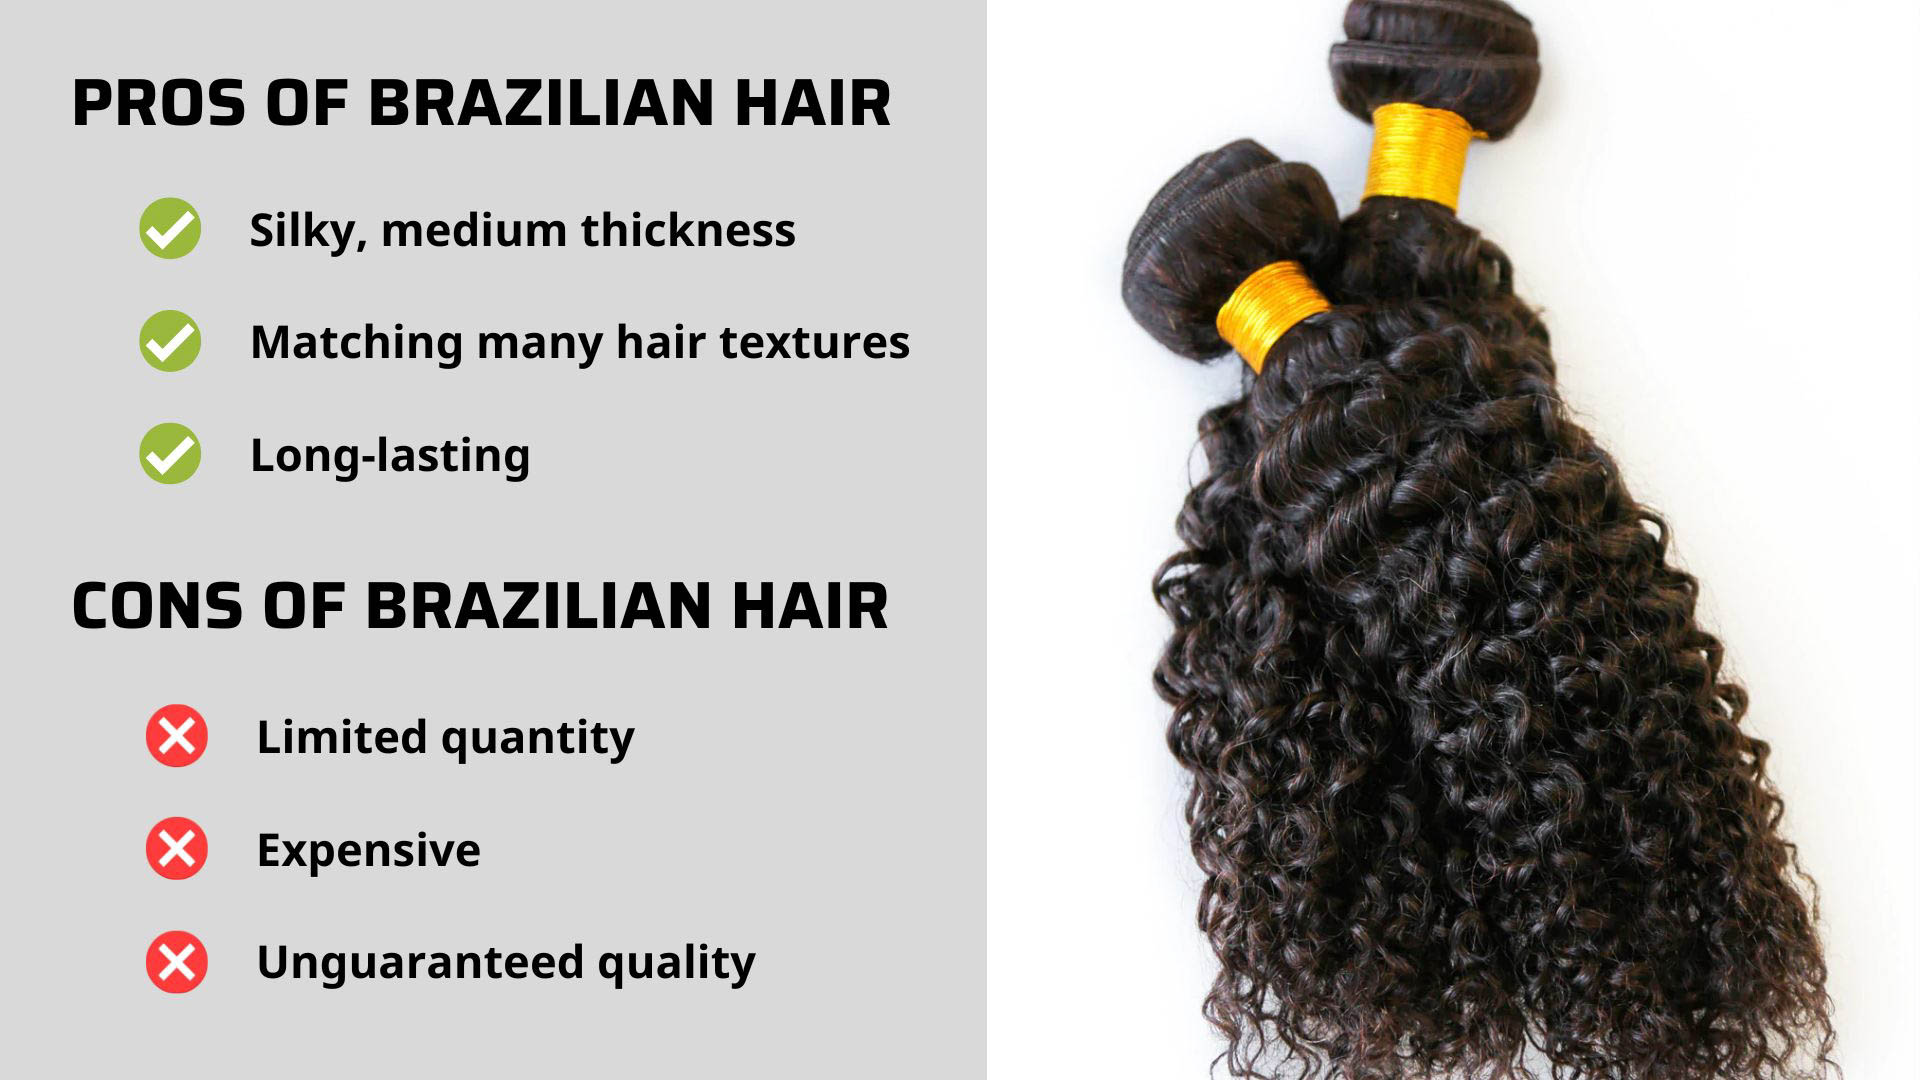 What are the pros and cons of Brazilian hair?